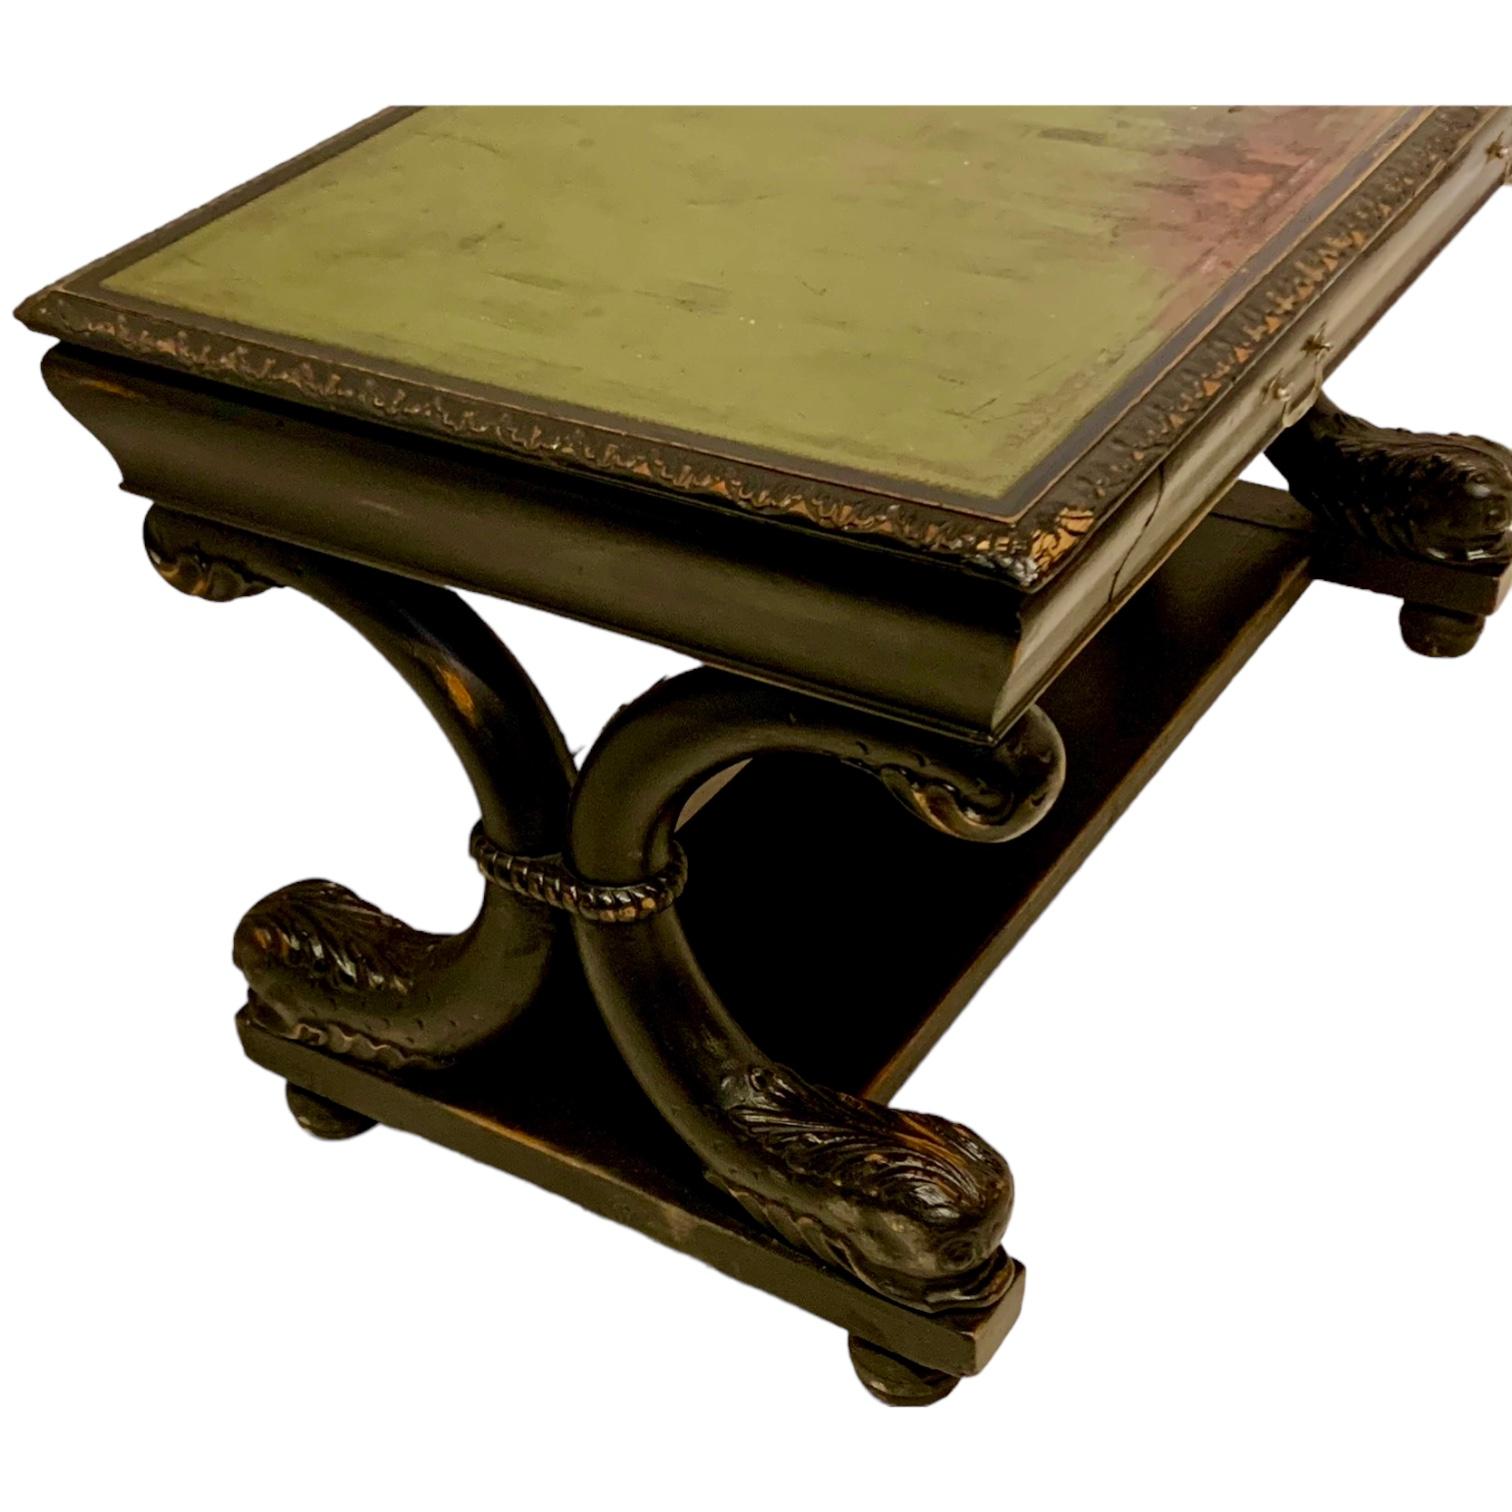 Neo-Classical R.J. Horner Style Desk / Table Green Leather Top & Dolphin Base For Sale 2